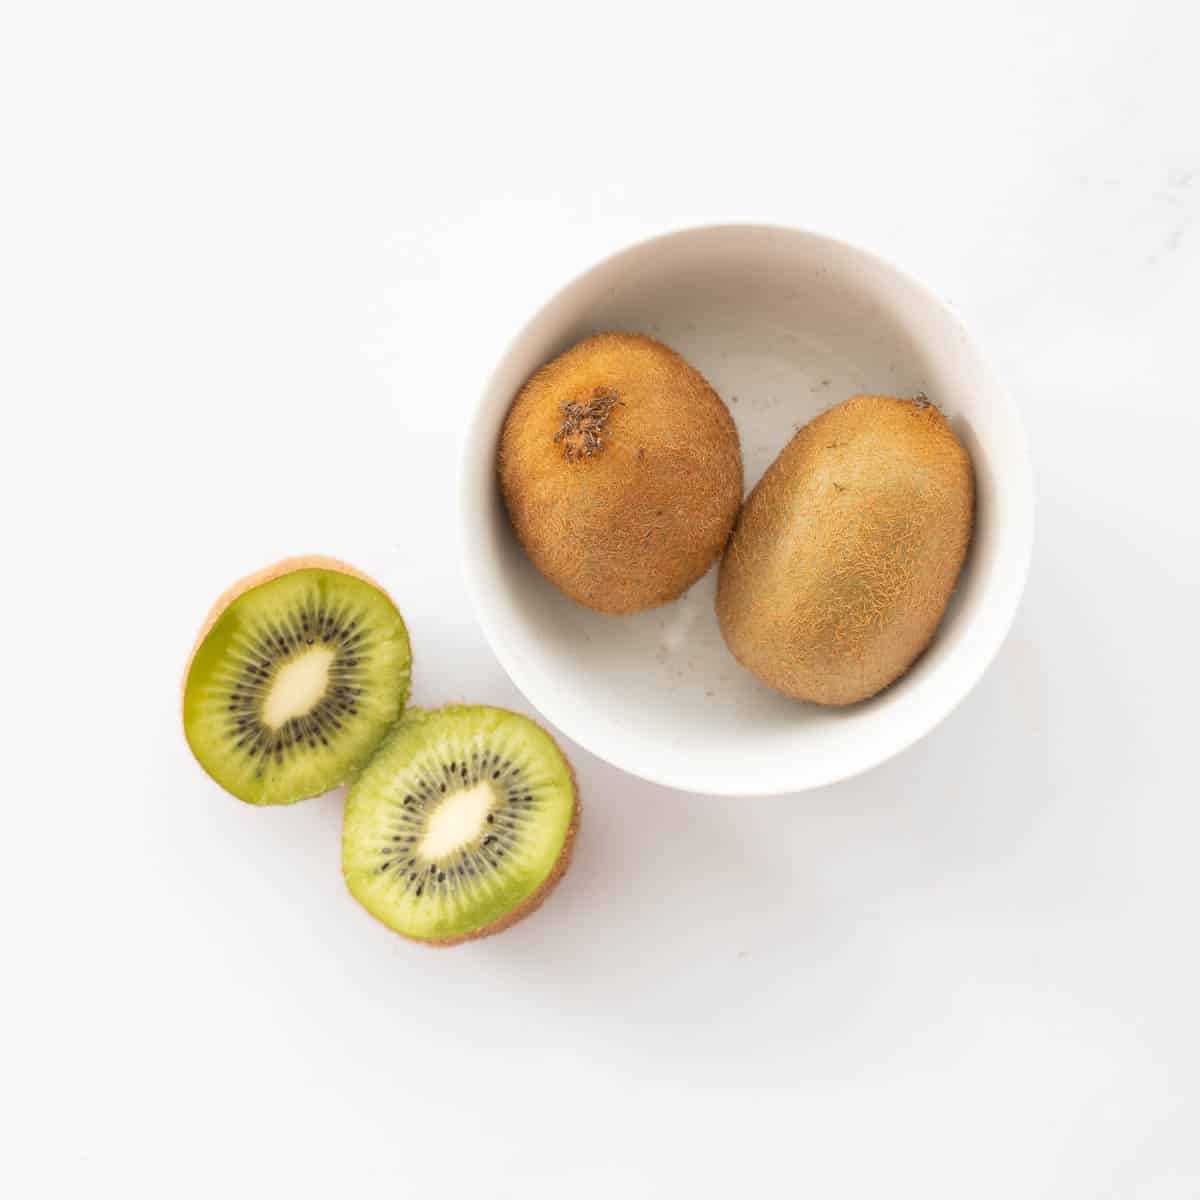 Two kiwifruit in a small ceramic bowl, next to a kiwifruit that has been sliced in half.